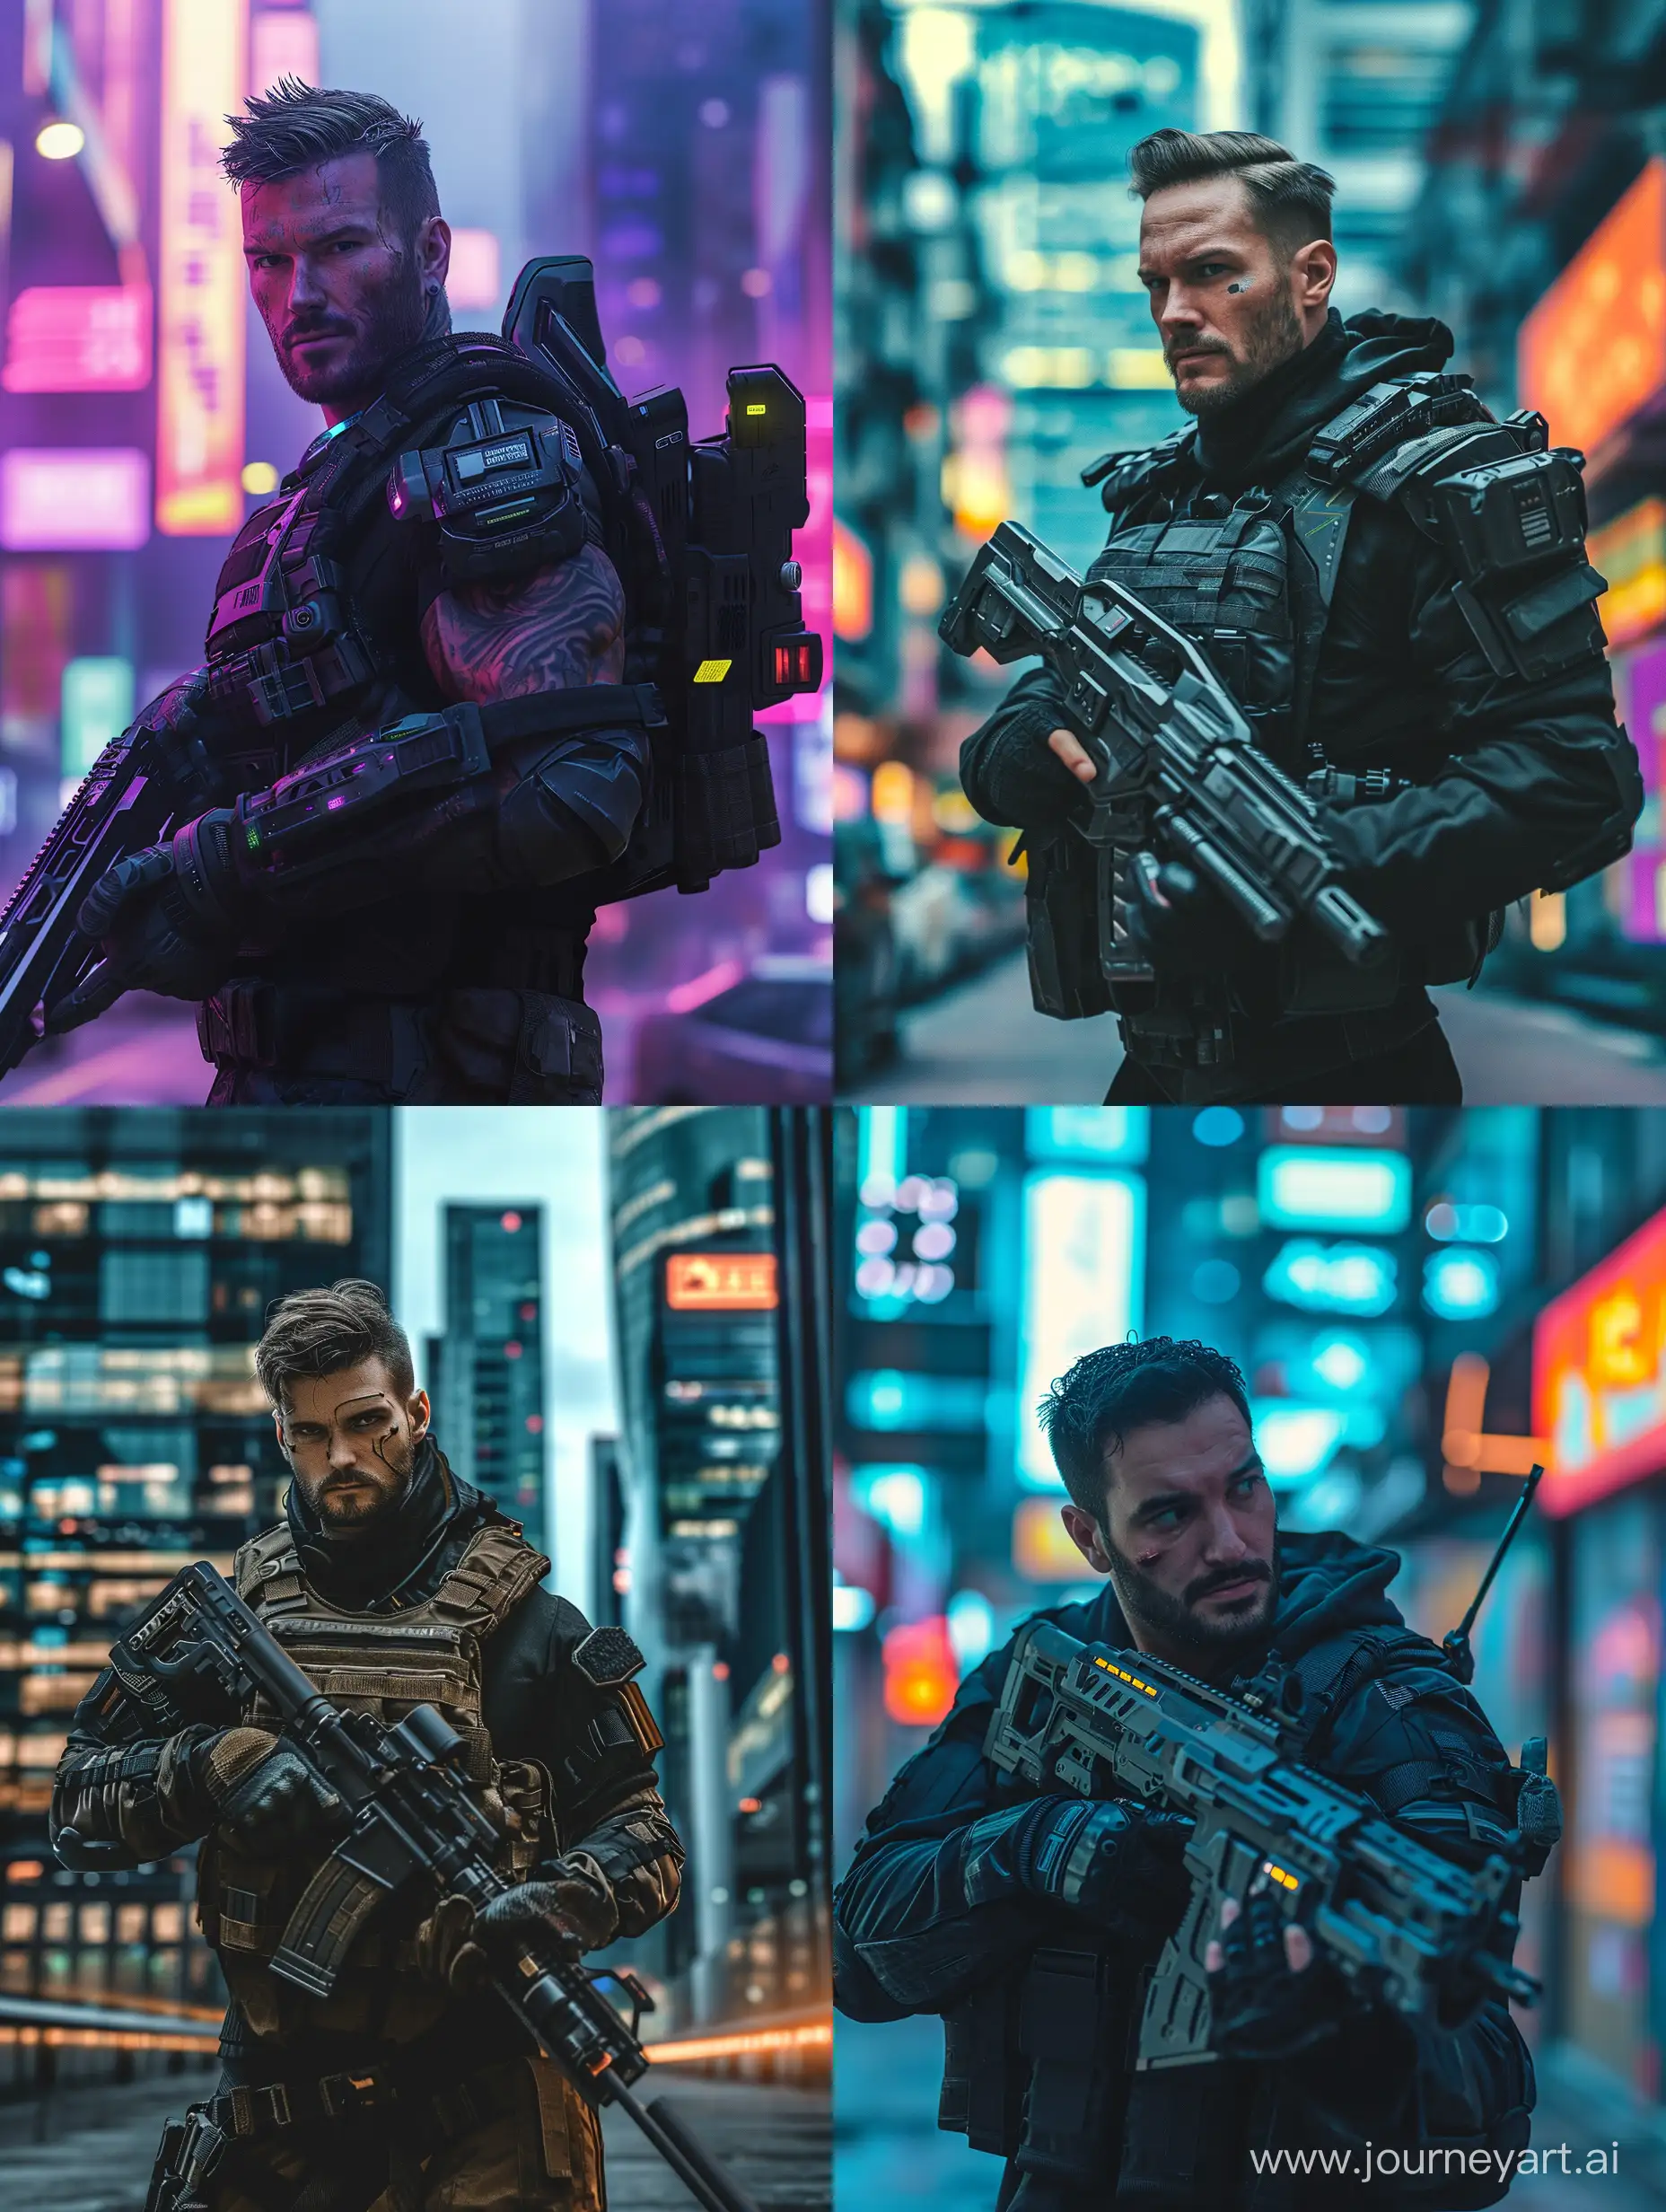 Realist Male valorant agent in real life, front view, view look at me, carrying kriss vector gun, background cyberpunk city